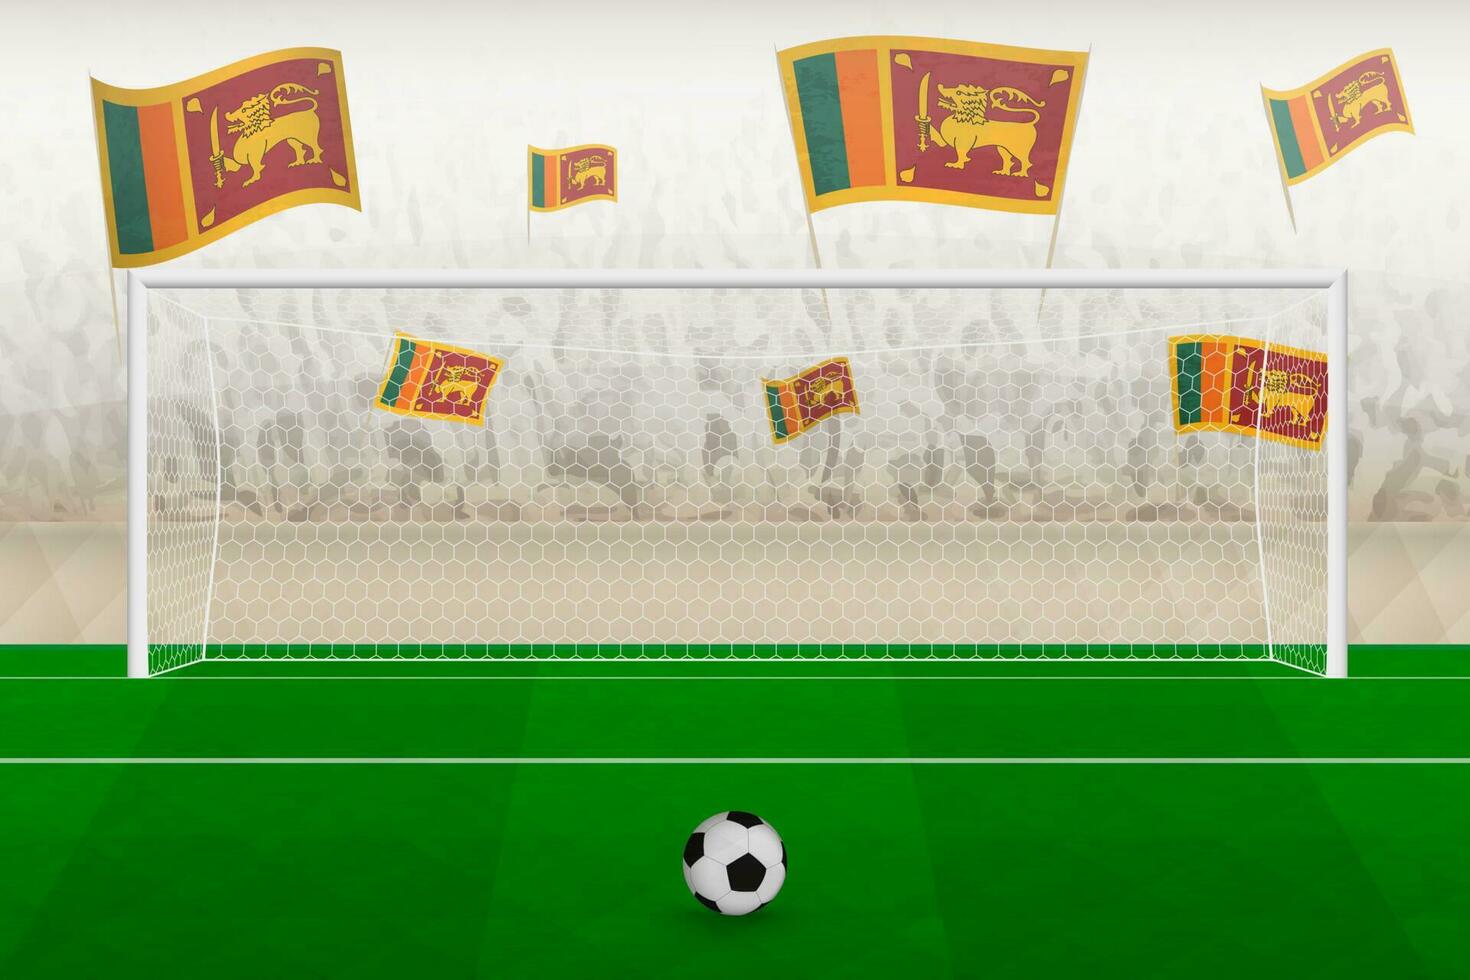 Sri Lanka football team fans with flags of Sri Lanka cheering on stadium, penalty kick concept in a soccer match. vector